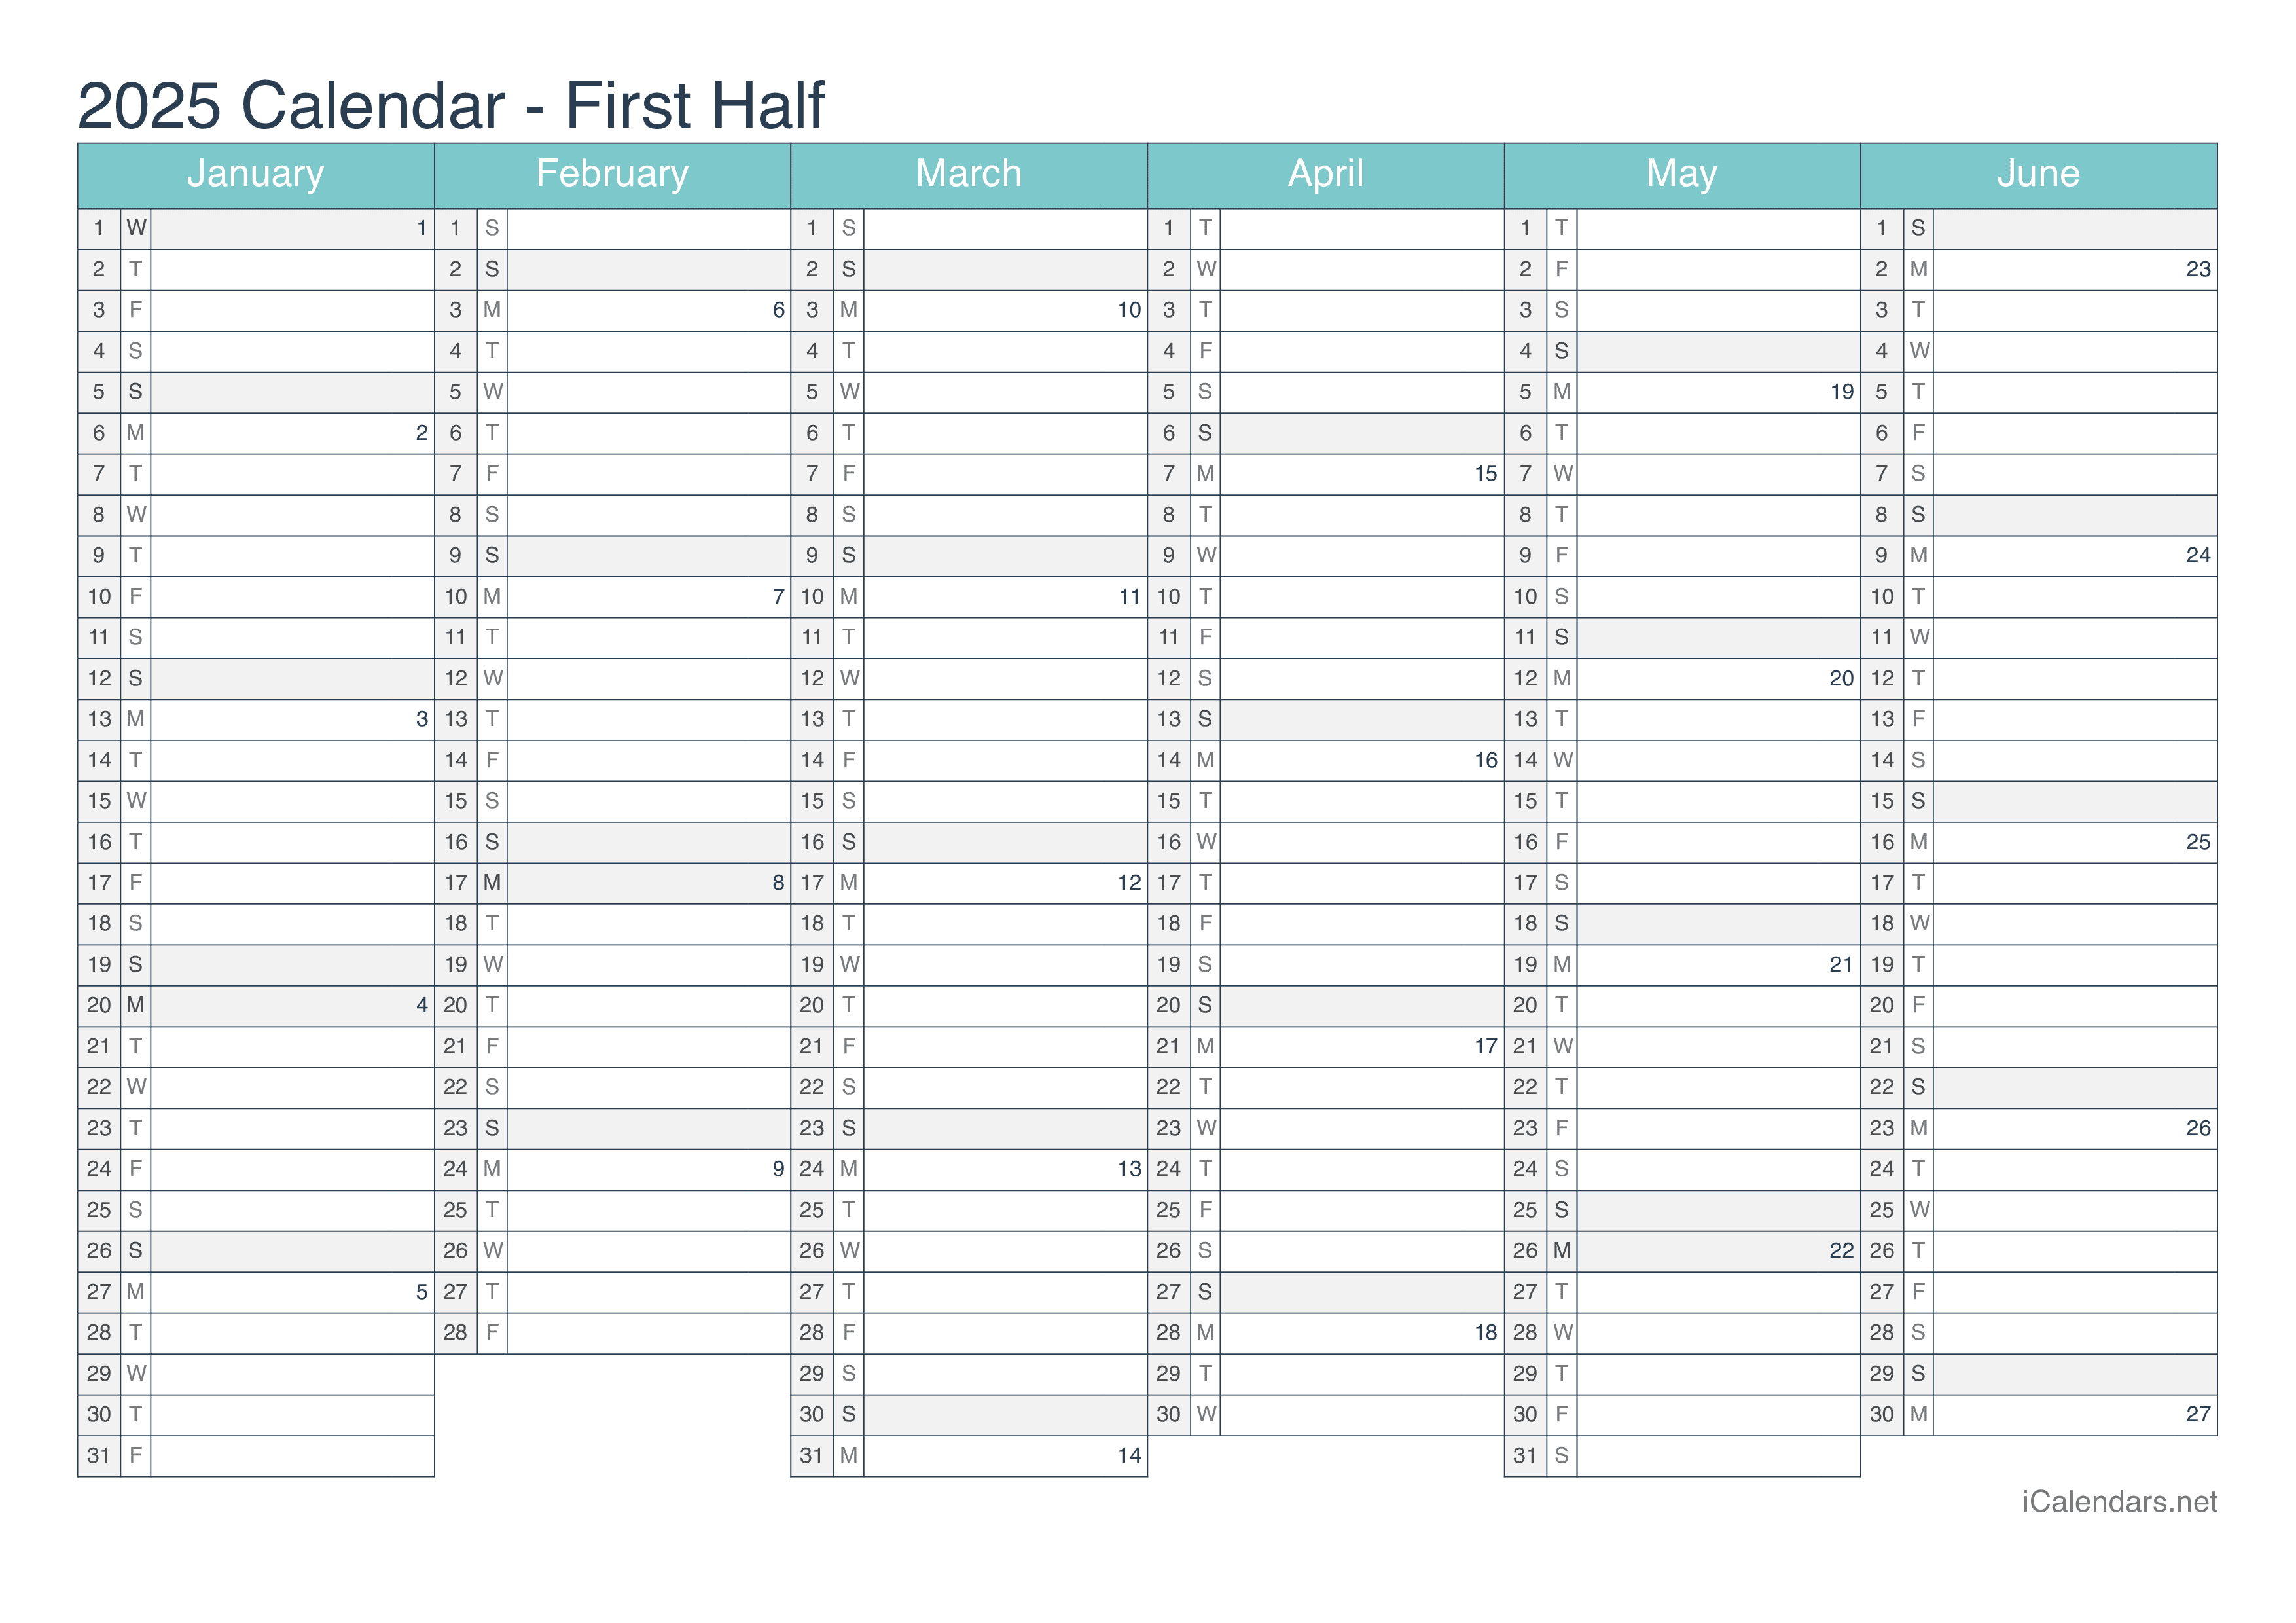 2025 Half year calendar with week numbers - Turquoise